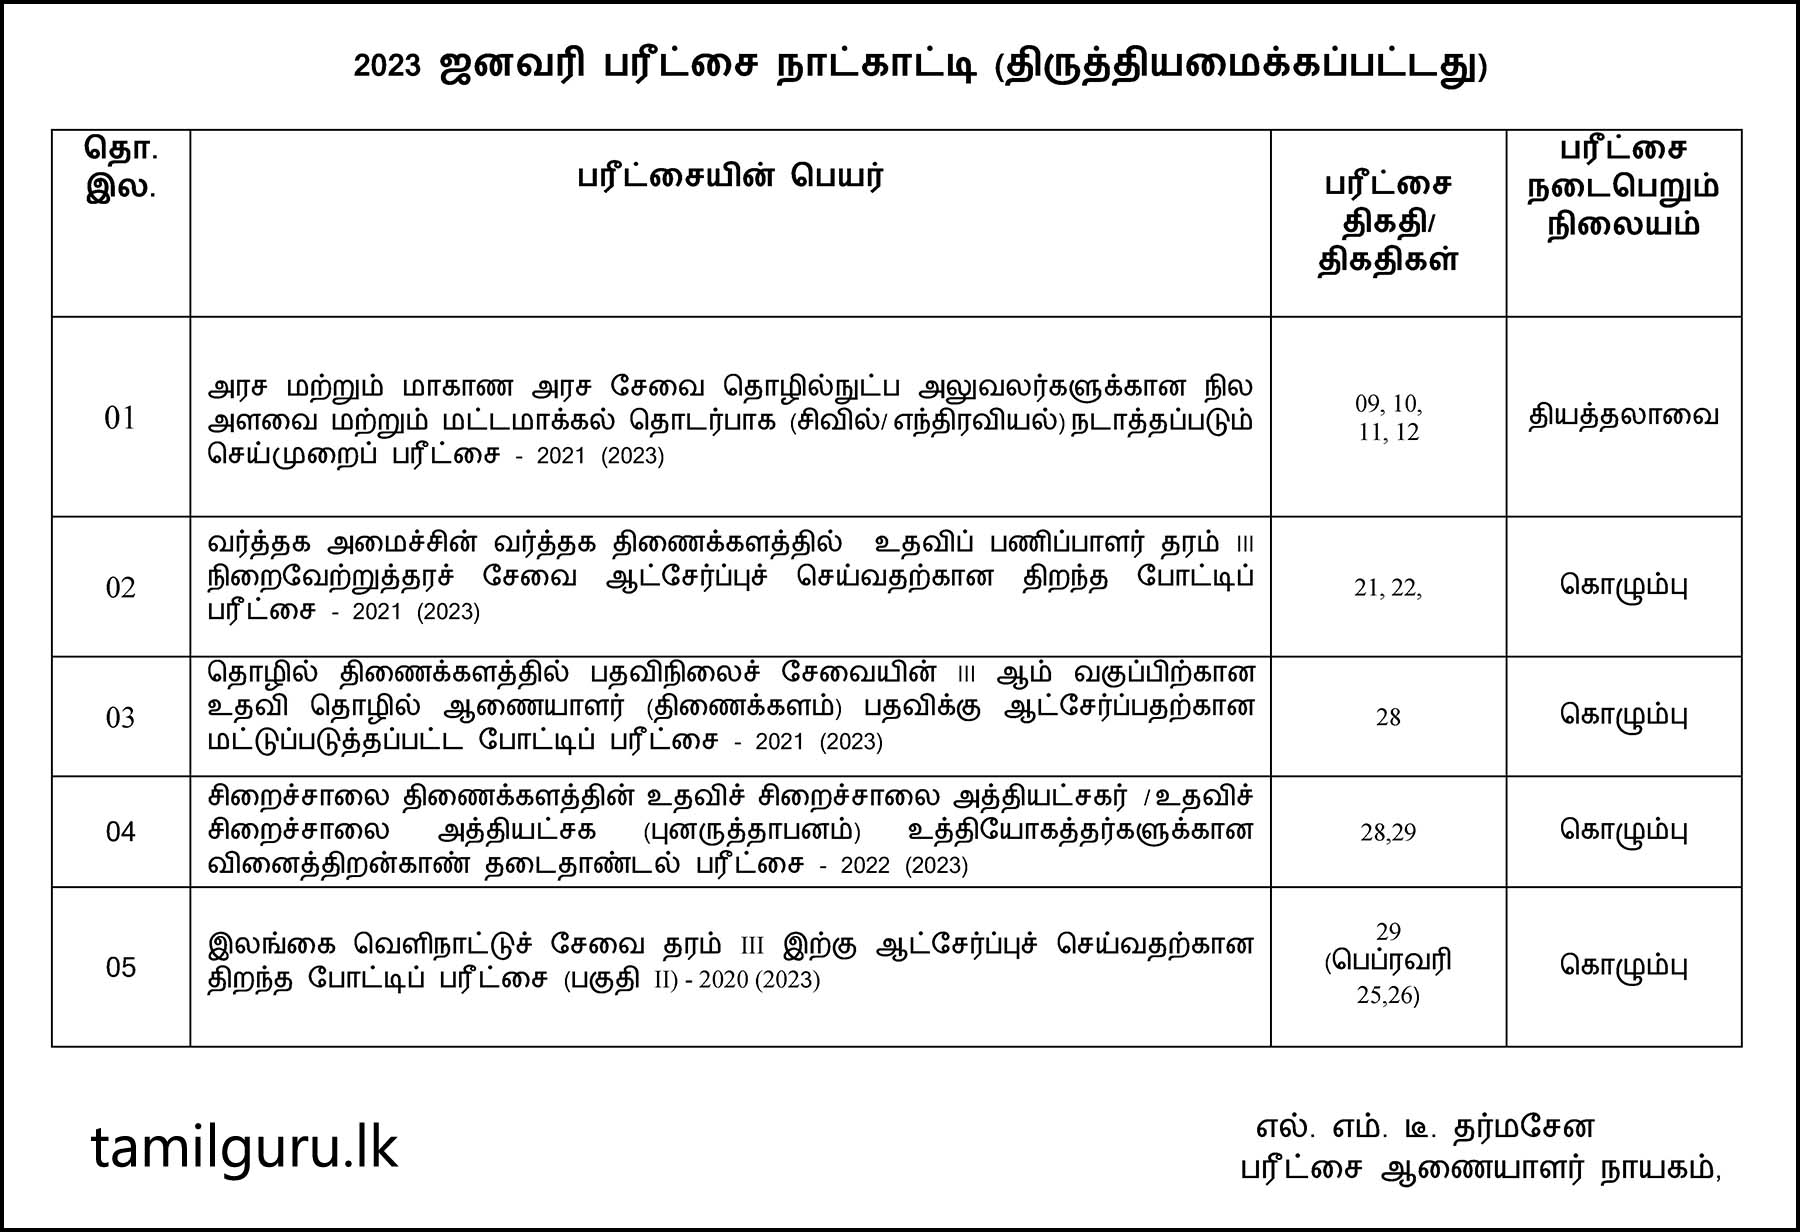 Examination Calendar for January 2023 - Department of Examinations (In Tamil)